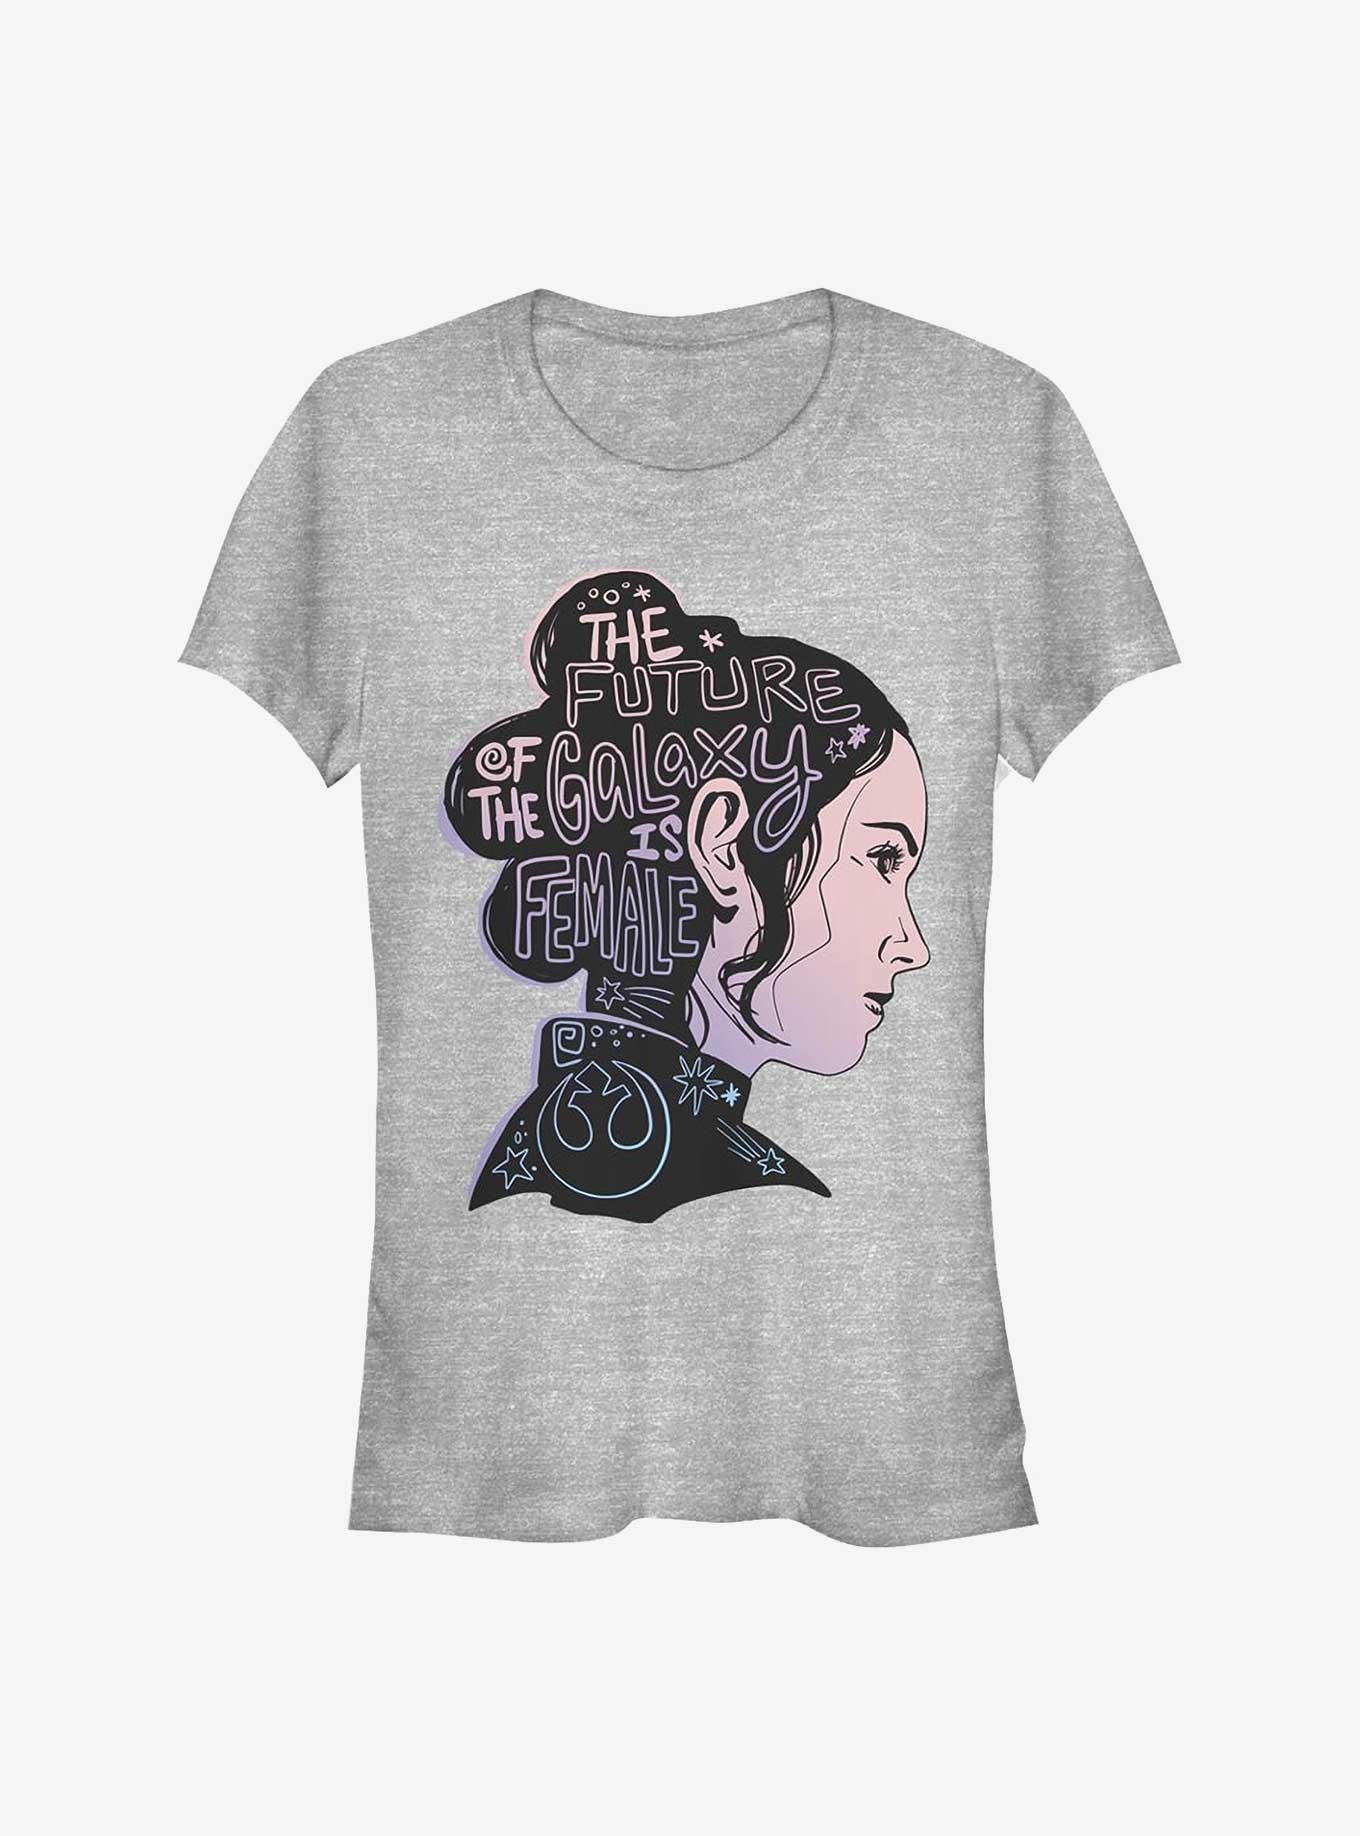 Star Wars The Future Of Galaxy Is Female Silhouette Girls T-Shirt